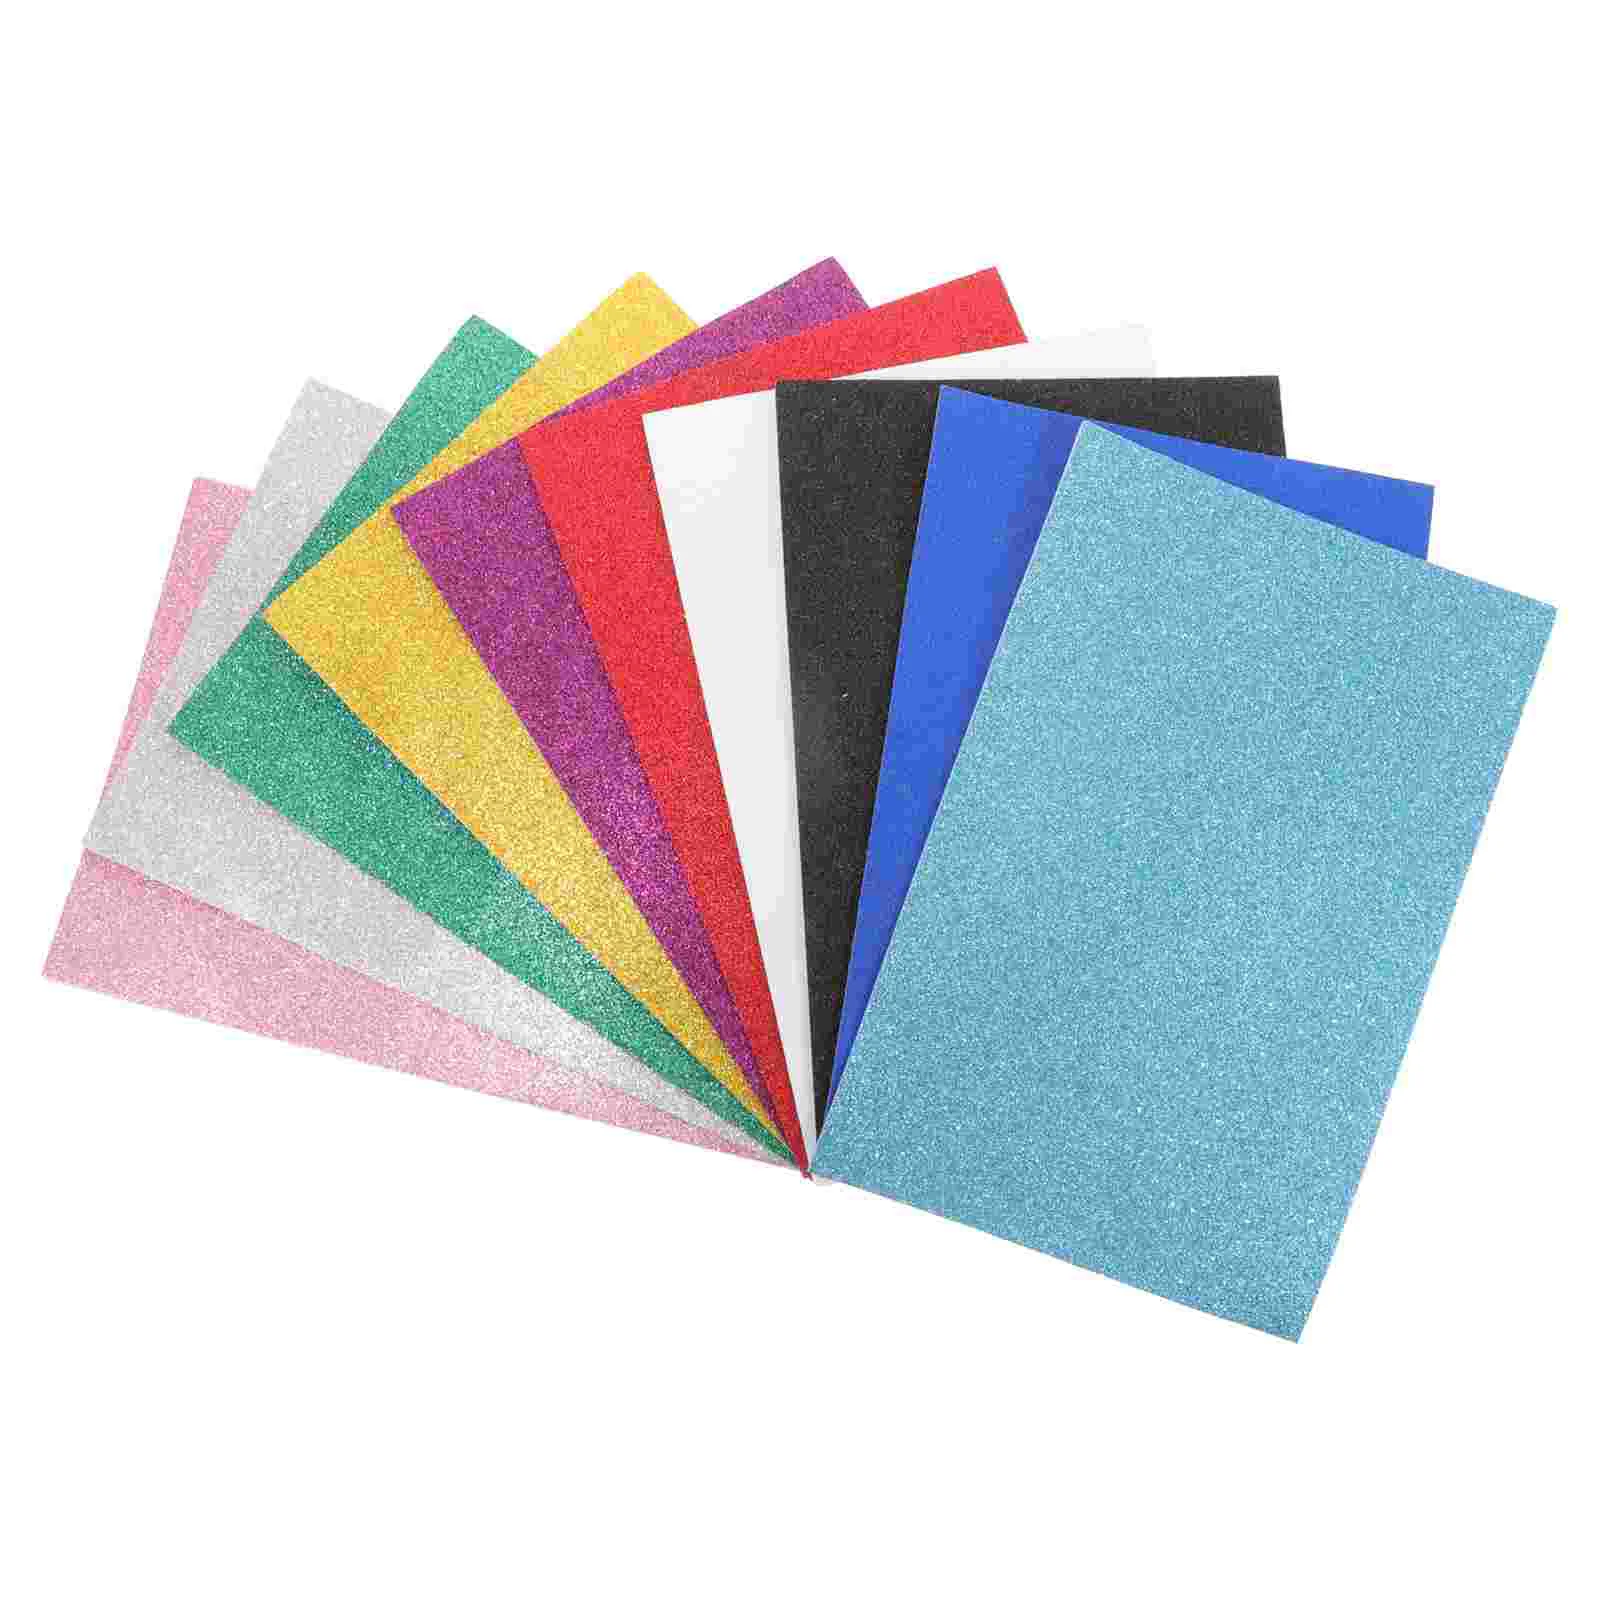 

10 Sheets Colored Sponge Paper Co-worker Gifts Kindergarten DIY Craft Material The Office Decor Handmade Materials